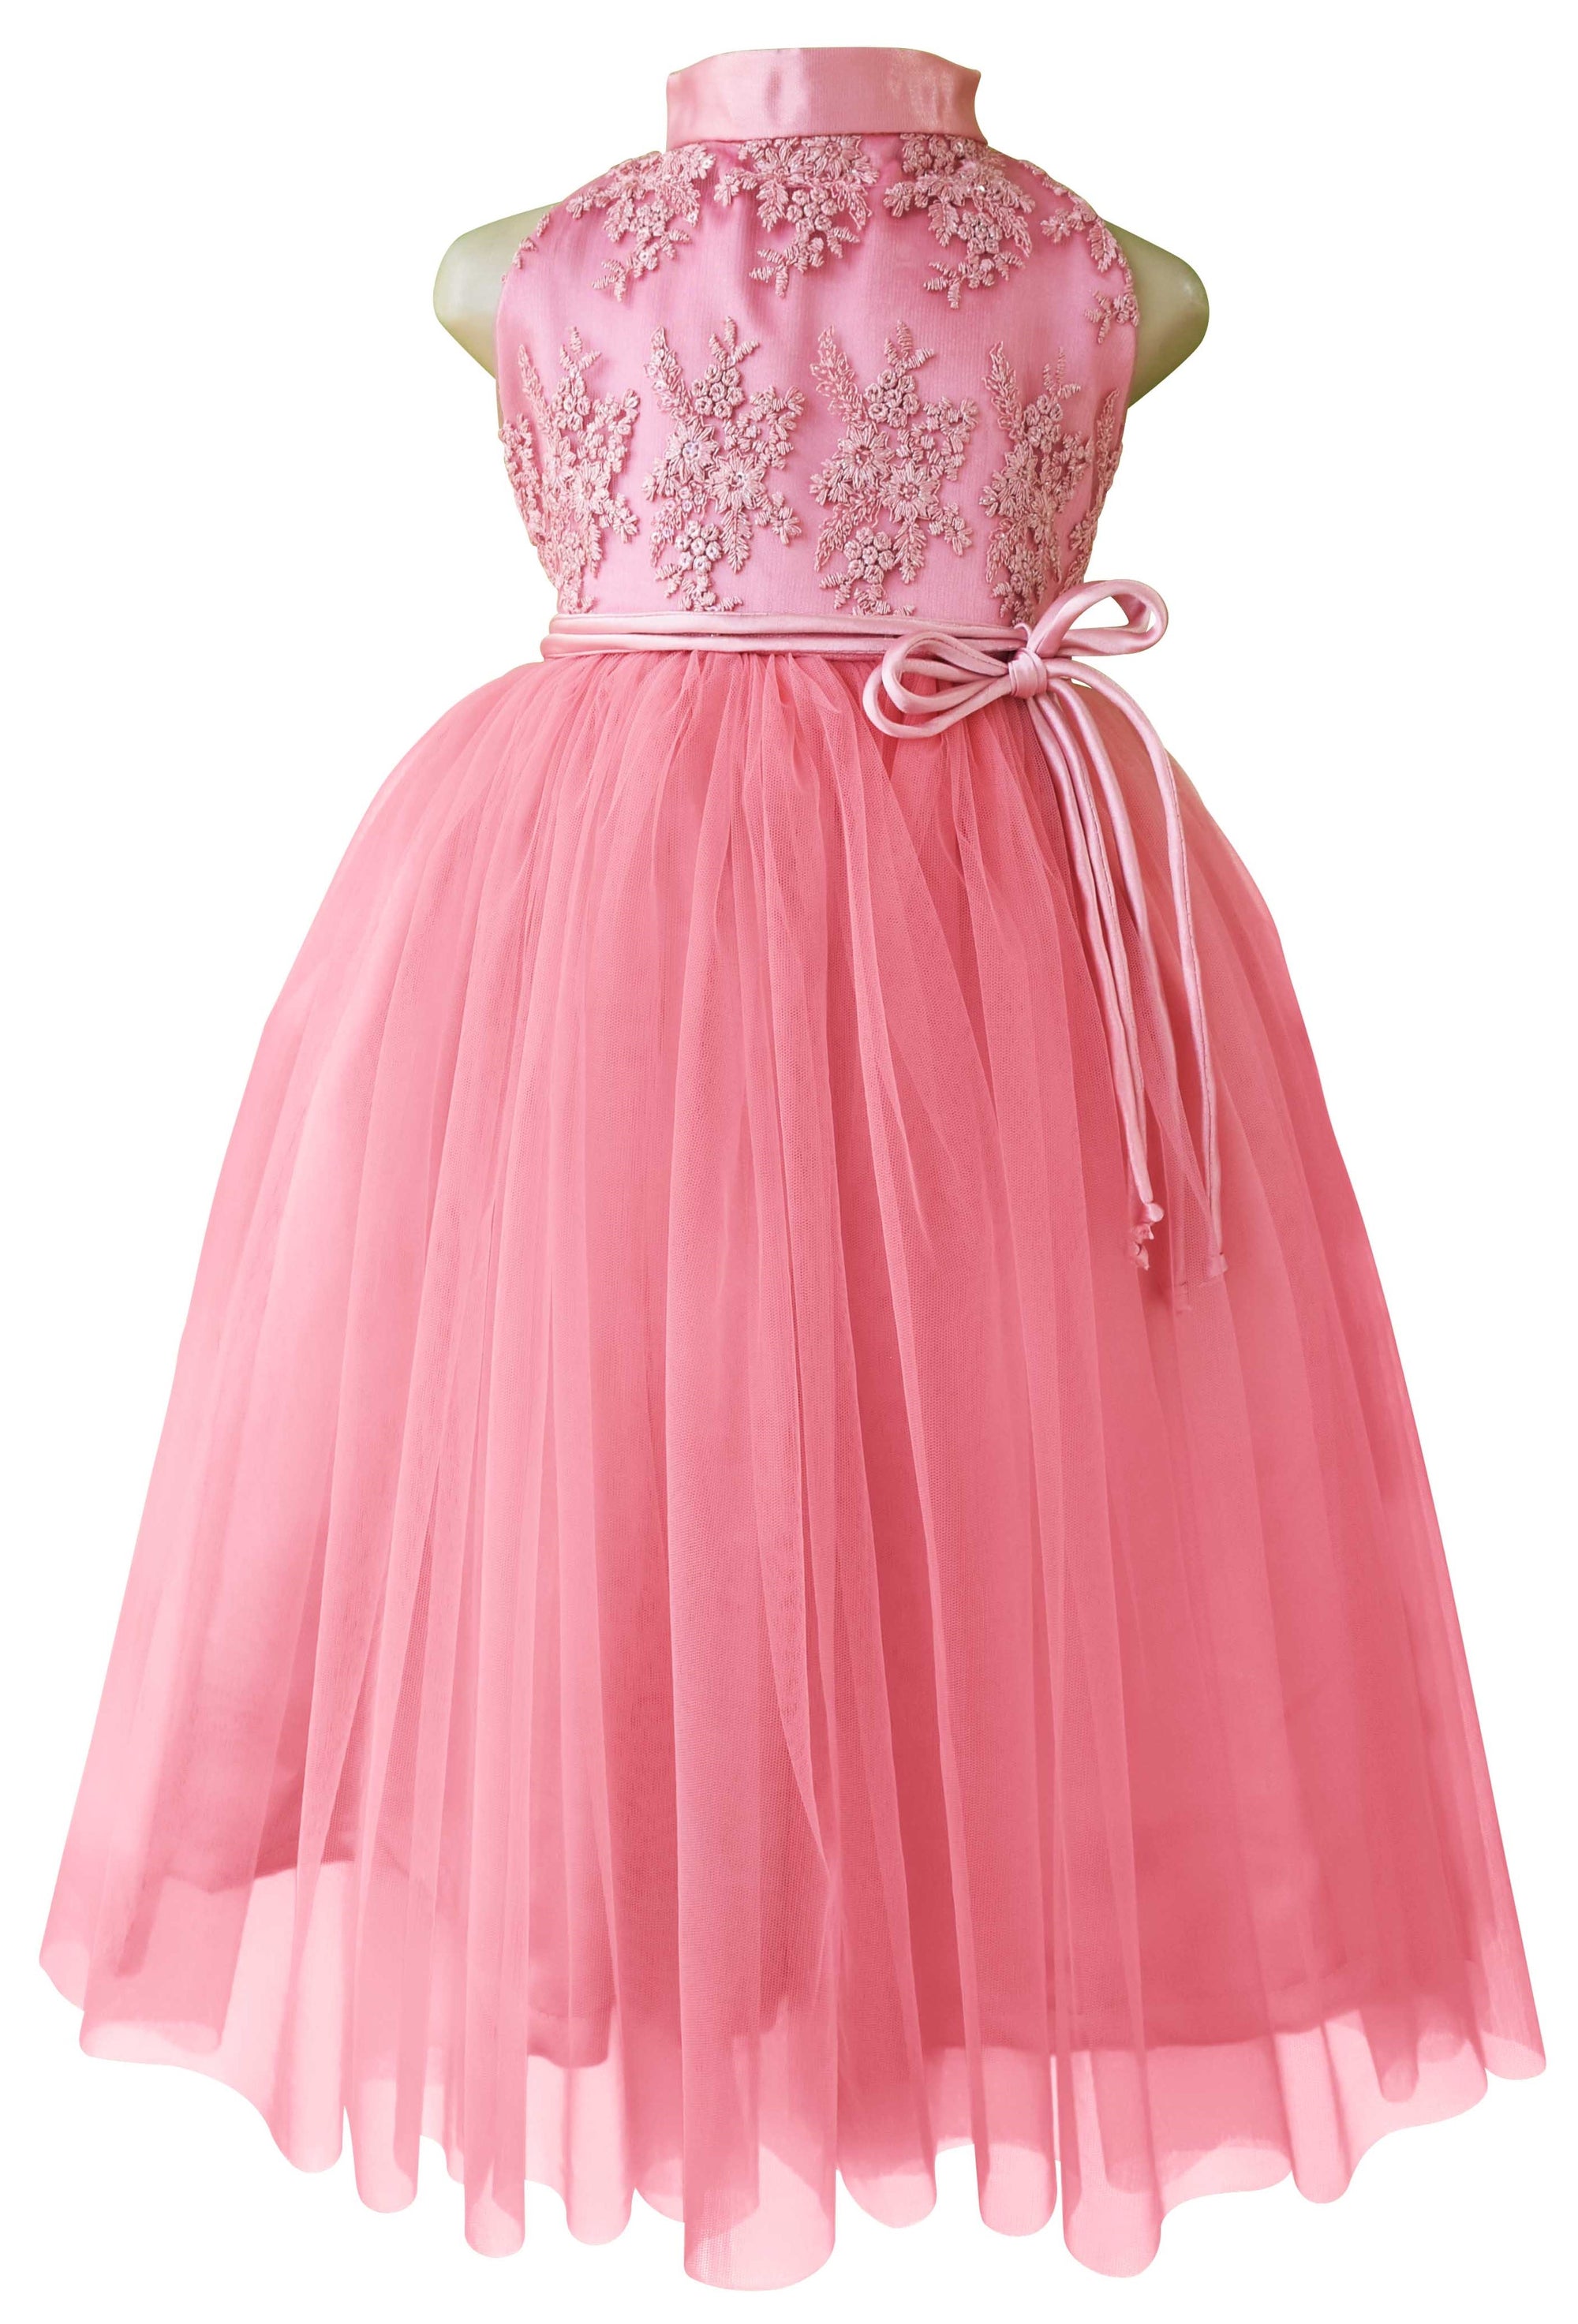 Gown for Girls - Latest Girls Gowns Designs for Wedding and Party | Gowns  for girls, Girls lace dress, Kids fashion dress